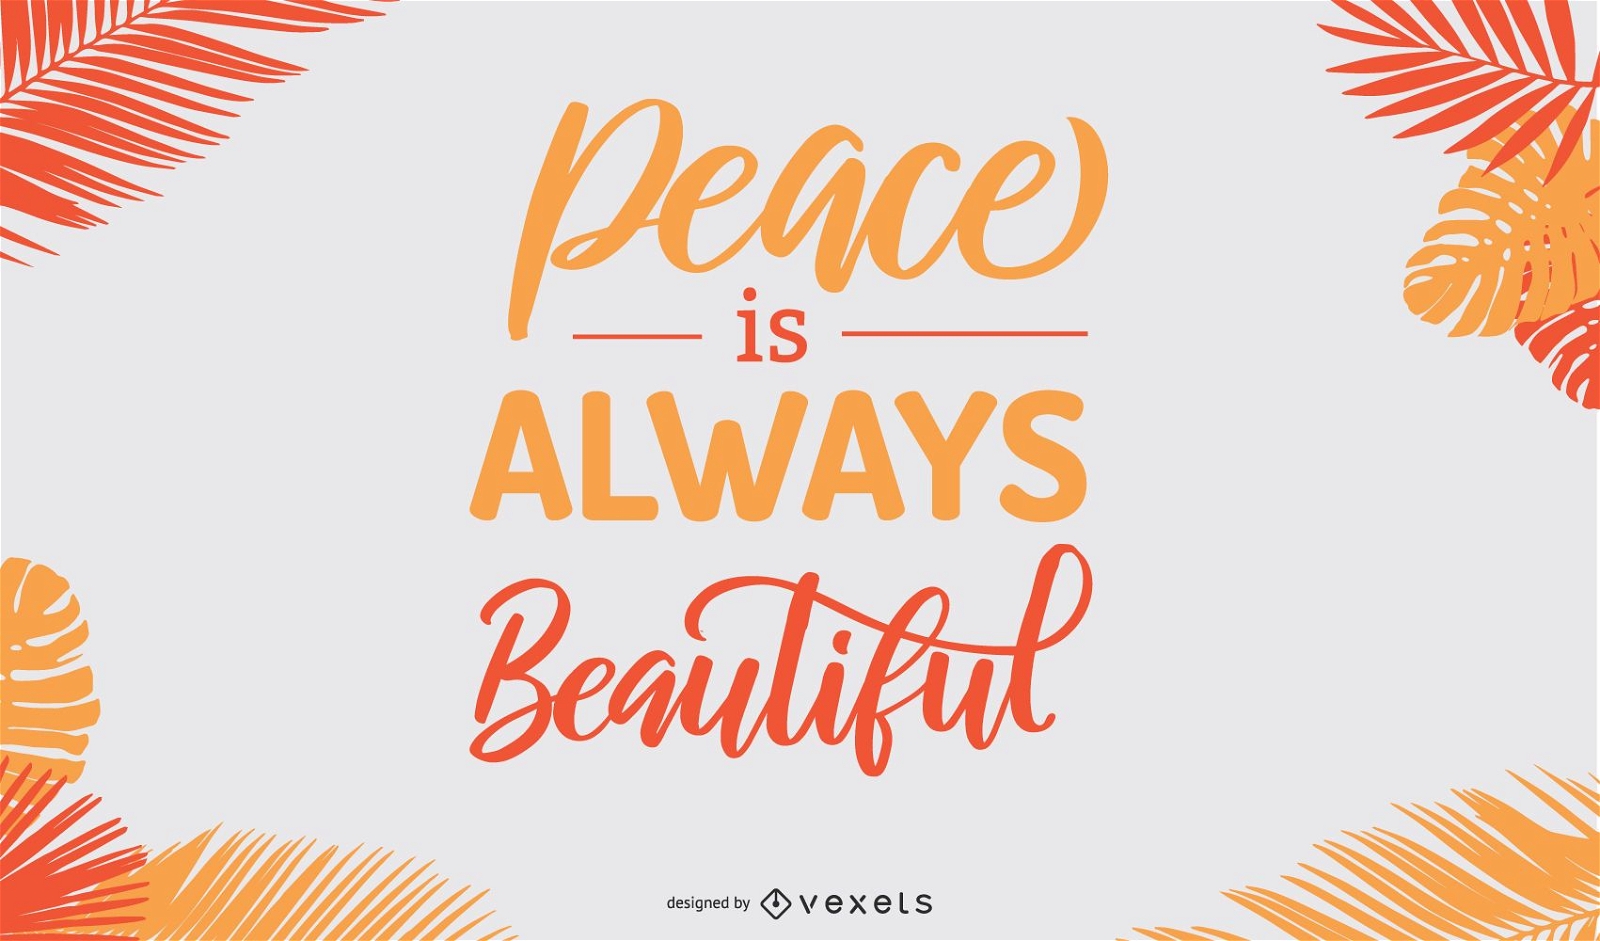 Peace is beautiful poster design